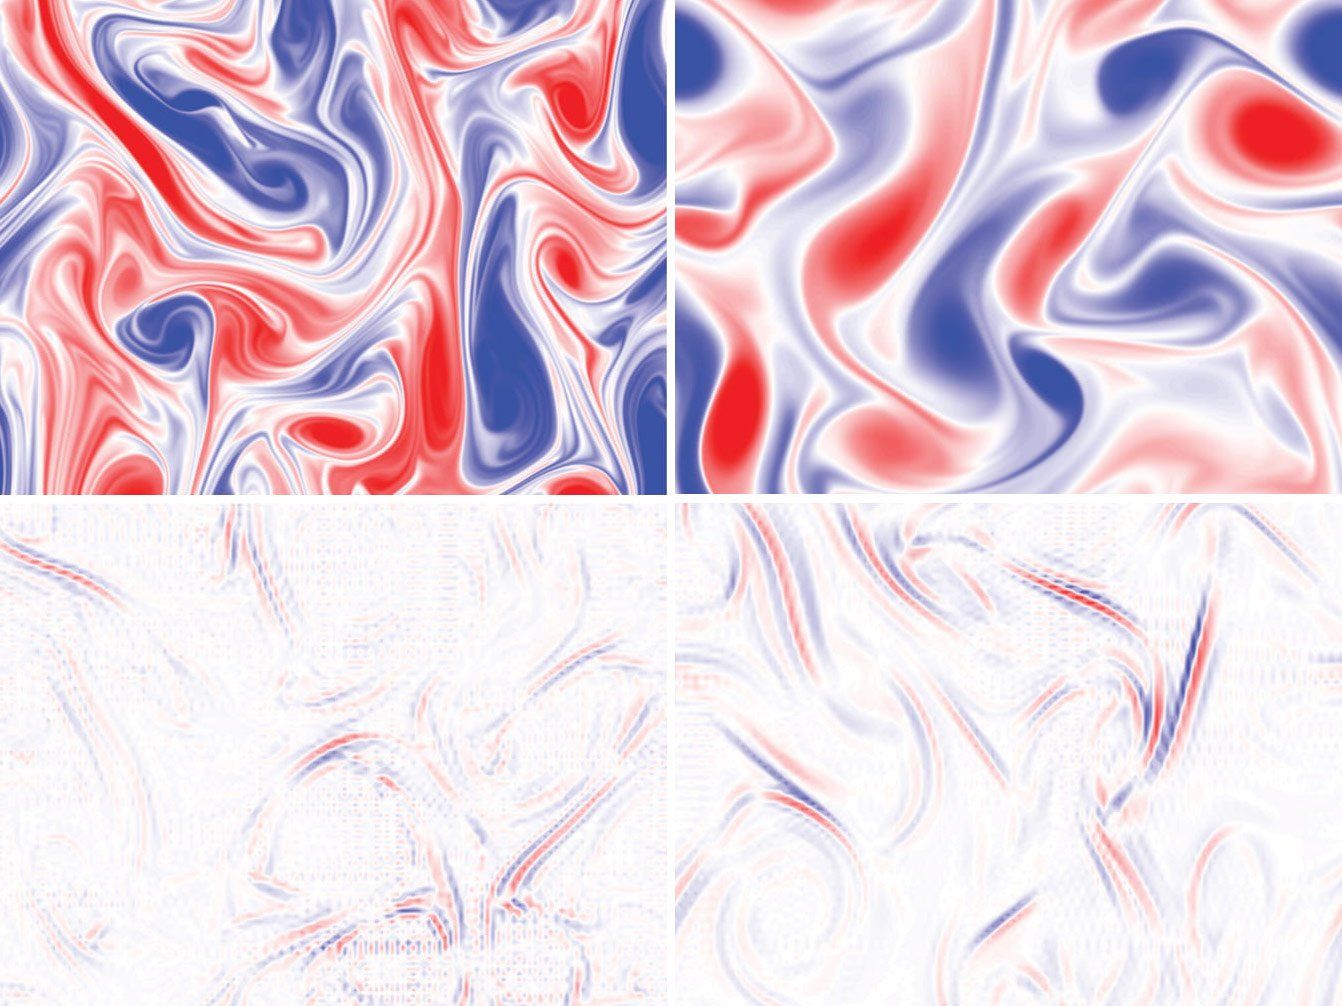 4 section image of 2 red and blue swirls on top and 2 lighter red and blue swirls on bottom 